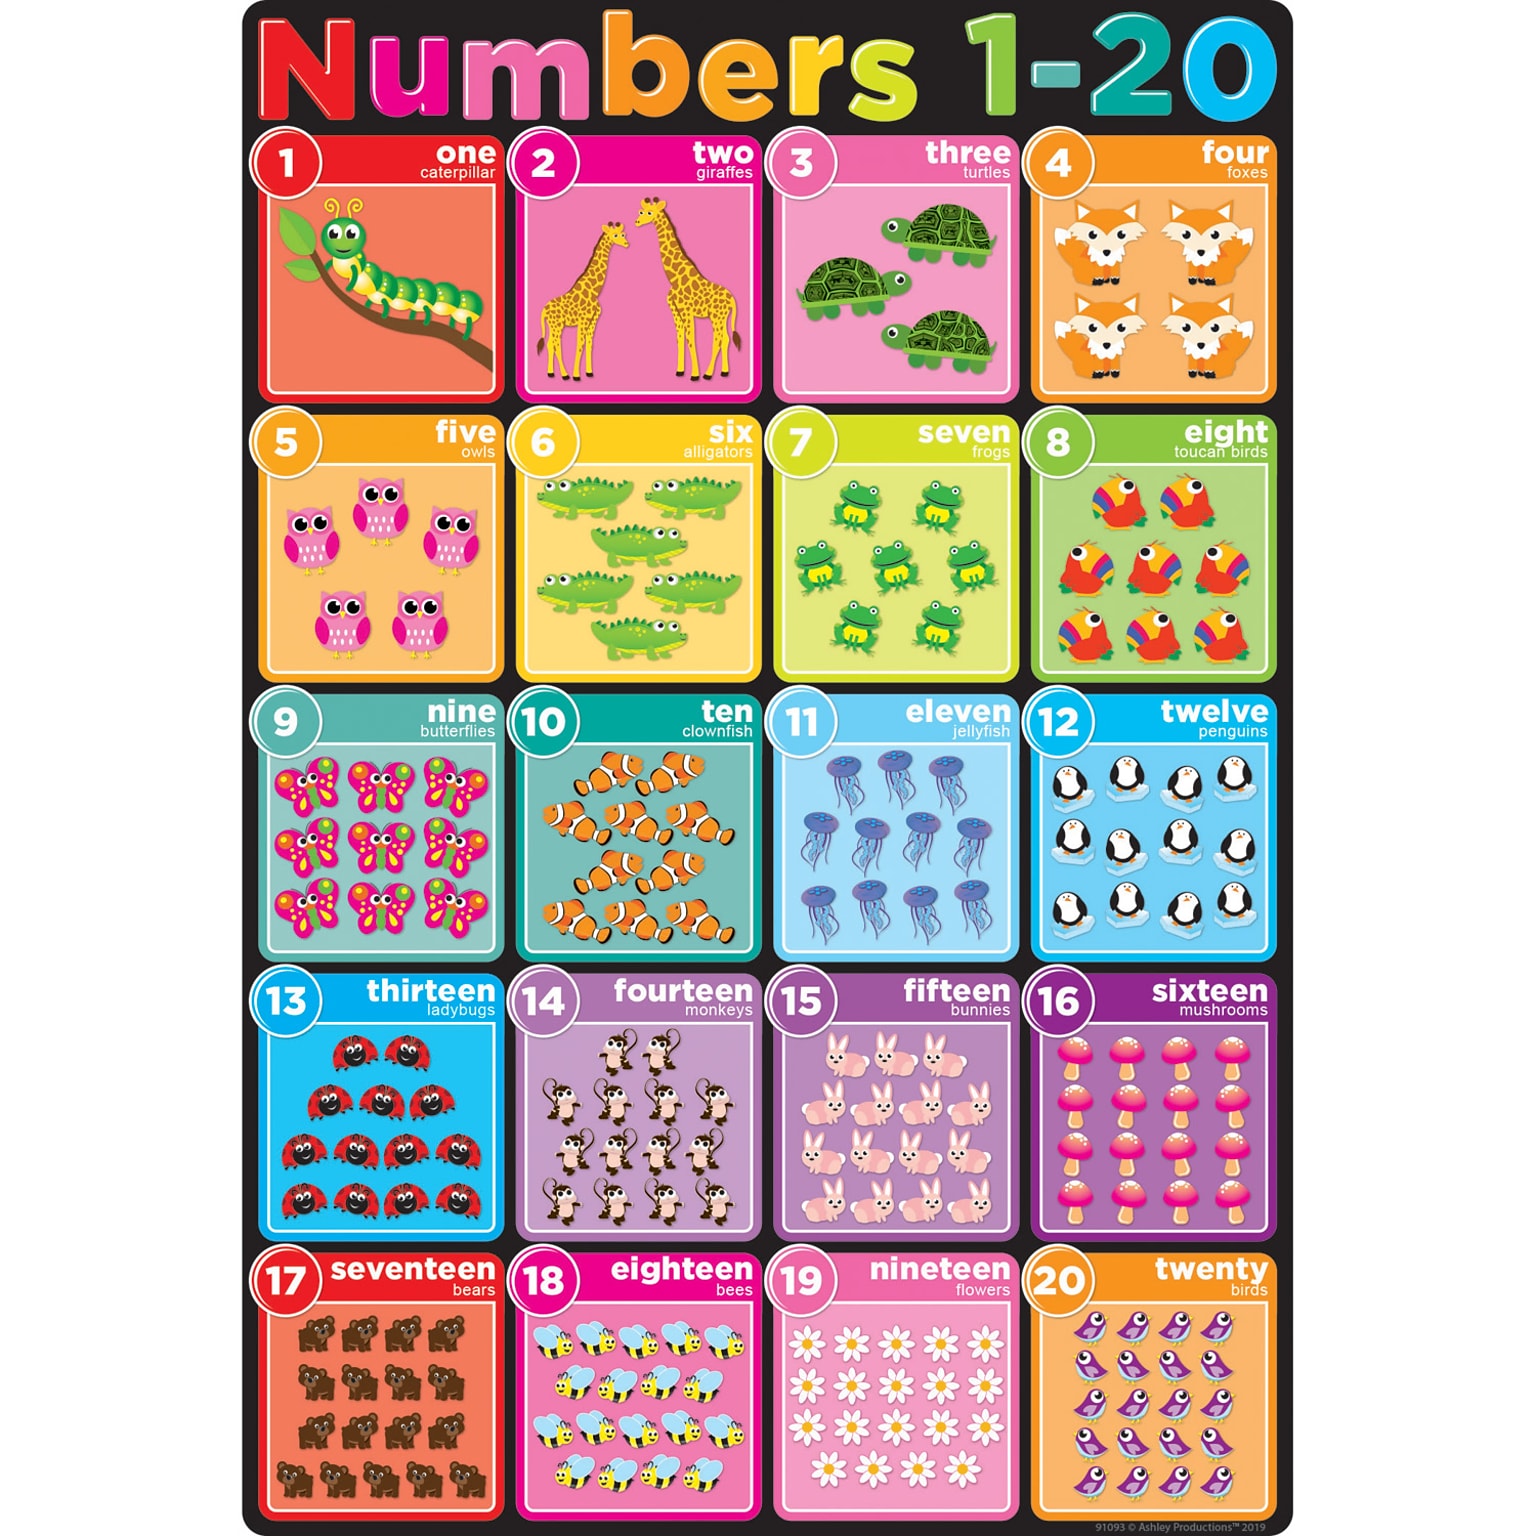 Ashley Productions Smart Poly 13 x 19 Numbers 1-20 Chart (ASH91093)